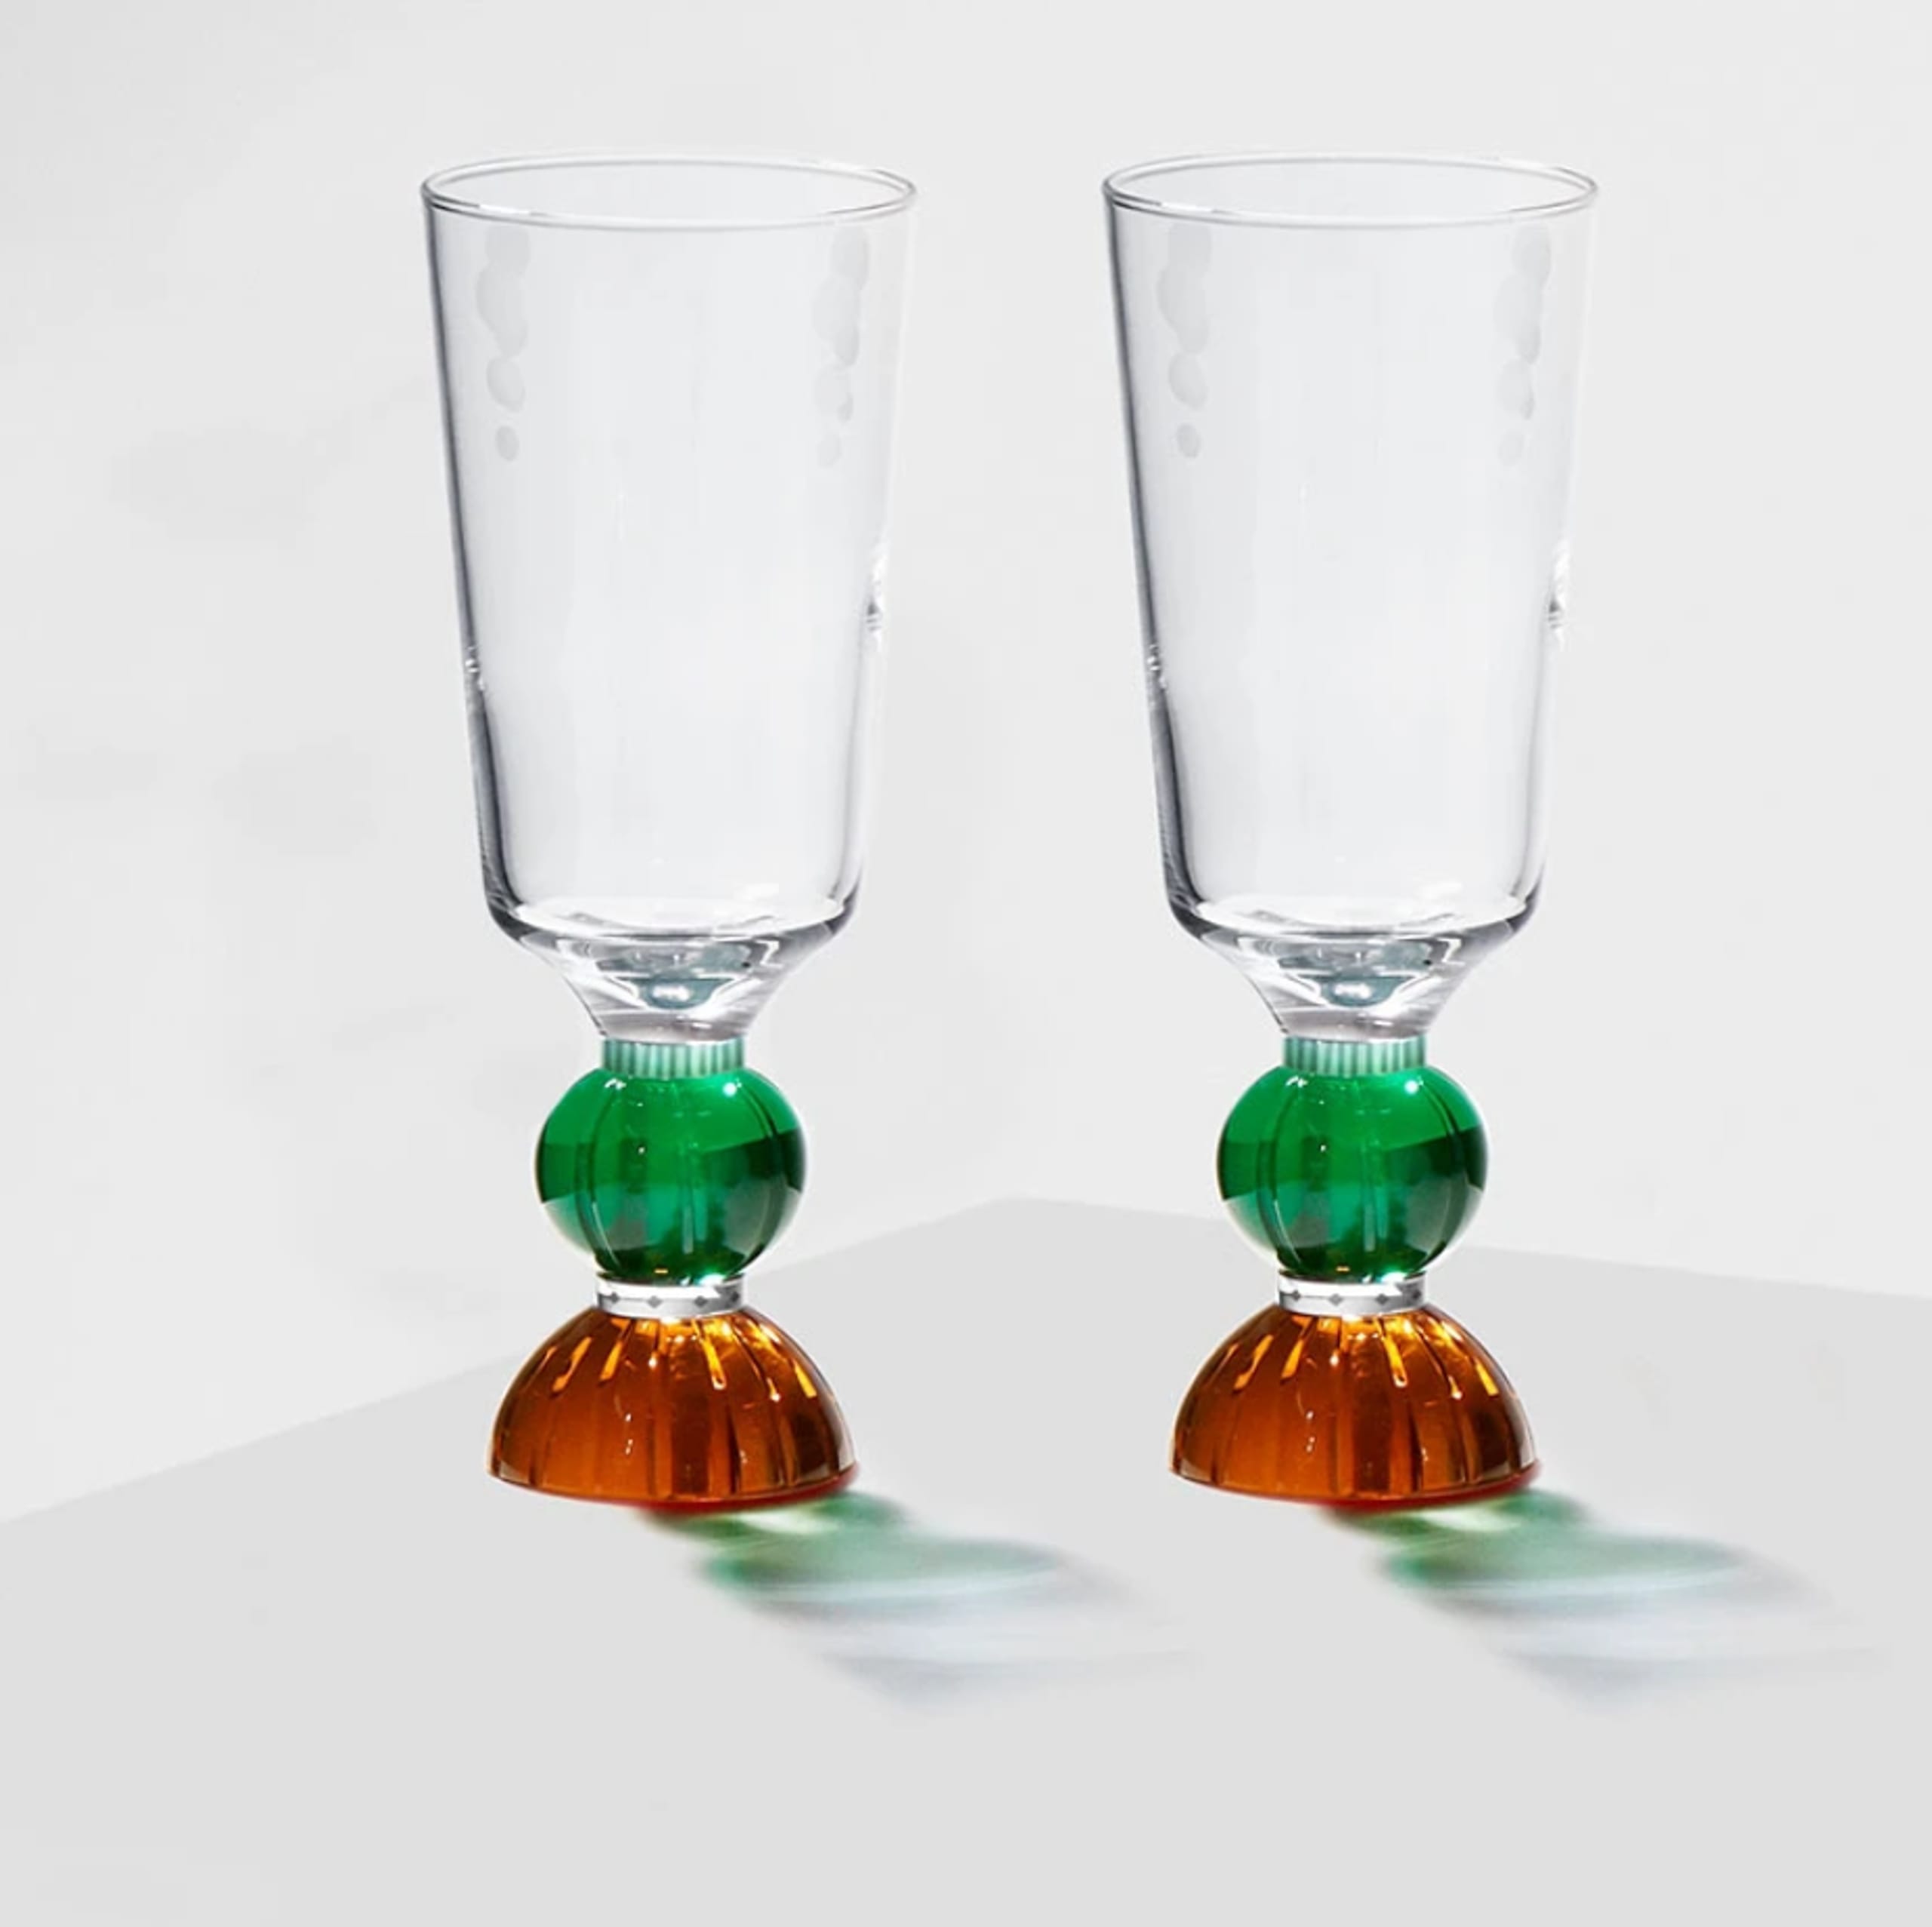 https://images.byflou.com/13/3/images/products/0/0/reflections-copenhagen-glas-windsor-tall-crystal-glass-clear-emerald-brown-mint-8545561.png.jpg